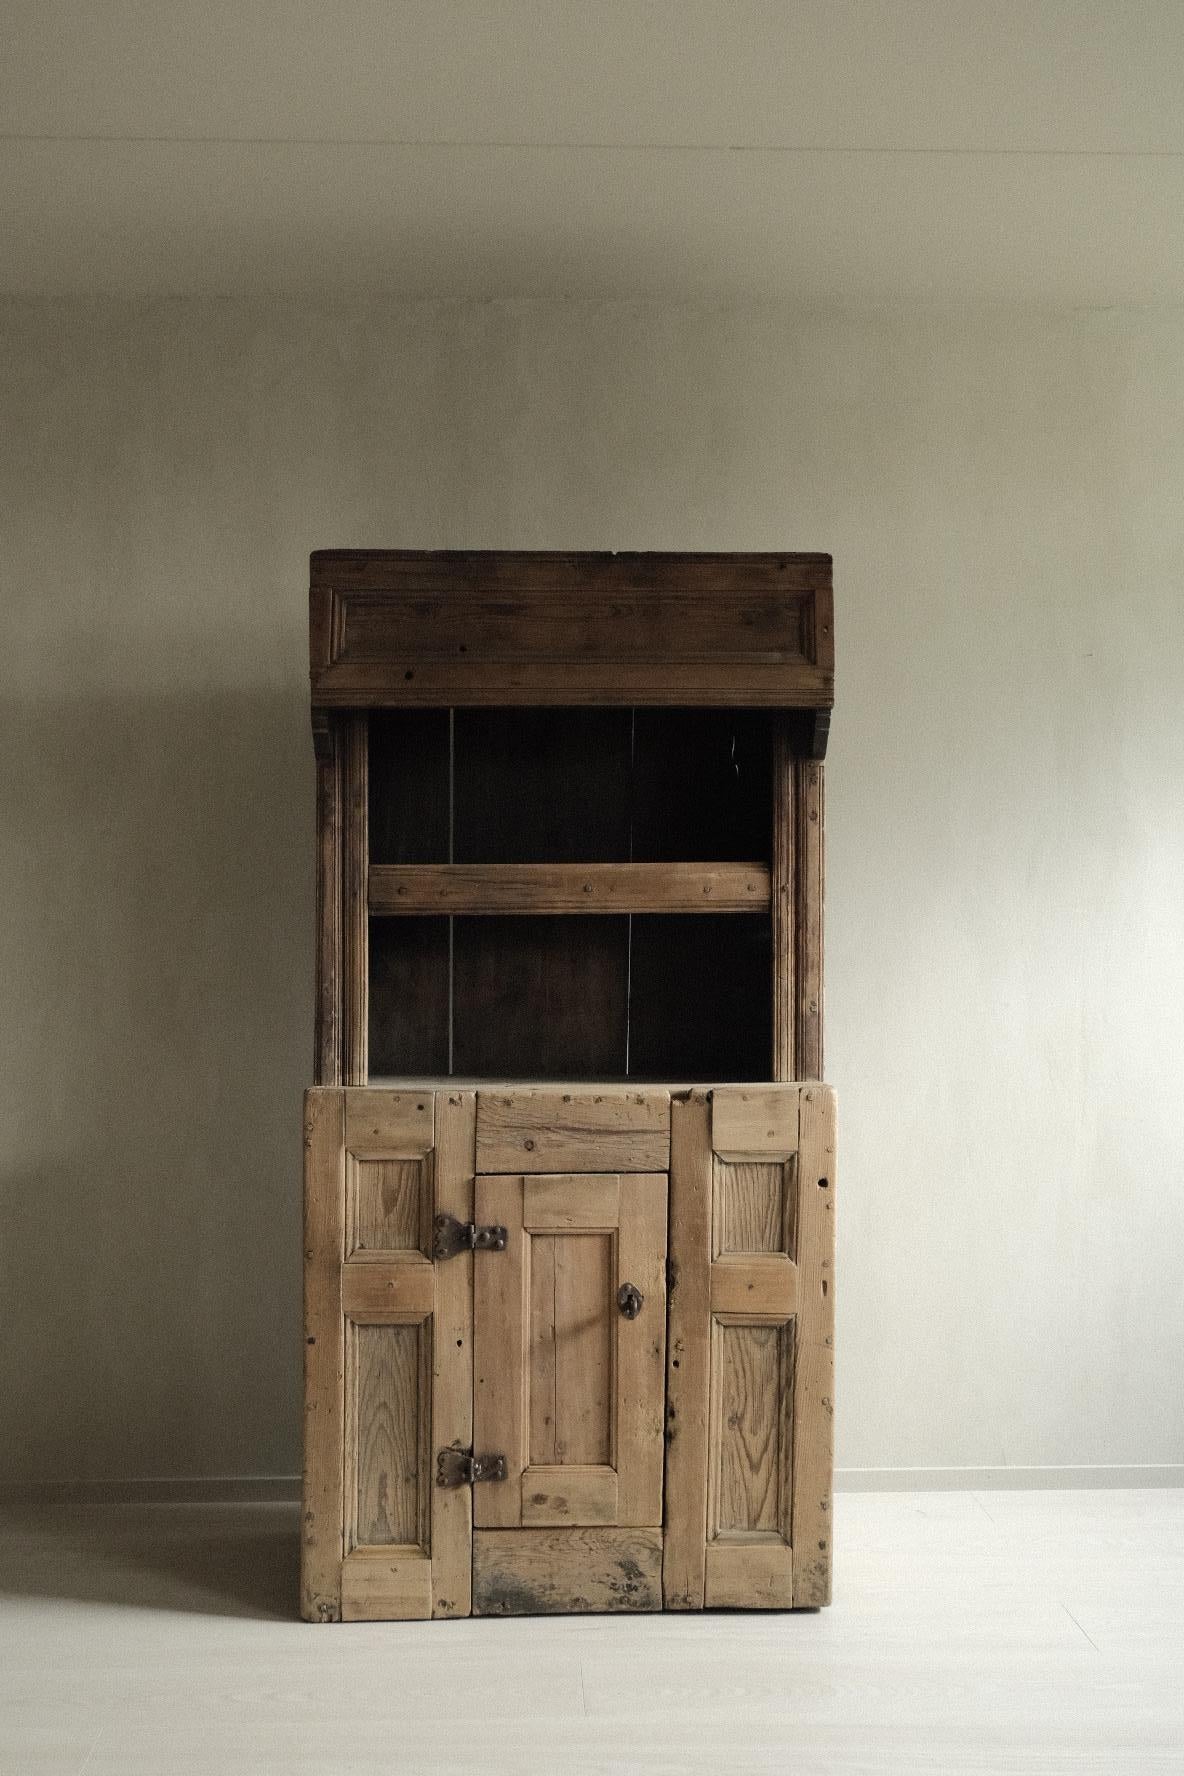 Beautiful antique cabinet in pine, made with wooden fittings. Handcrafted by a Swedish cabinetmaker in late 1700s.

A great vintage cupboard with a lovely patina. Original details like metal lock. Key included.

A unique rustic piece that fit in